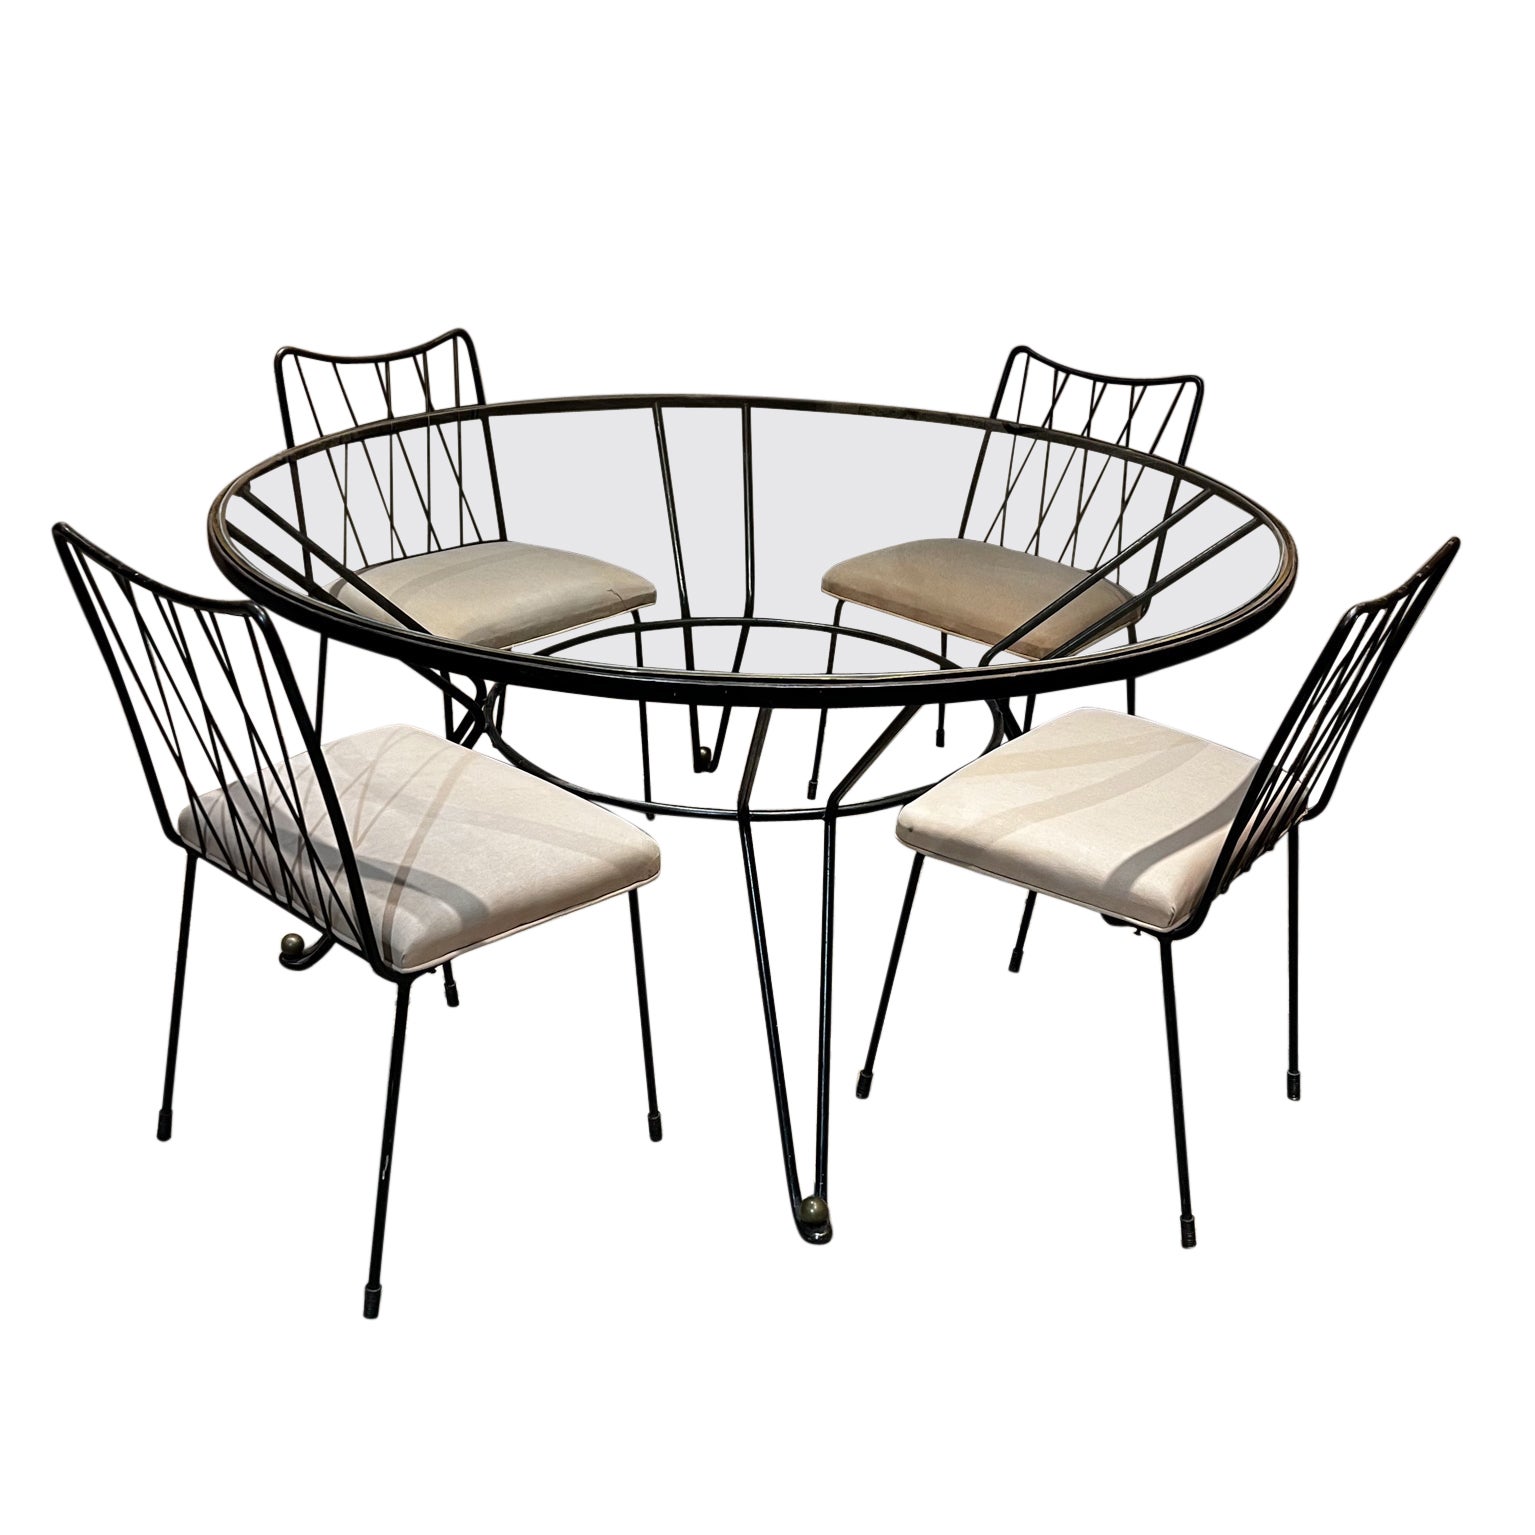 1950s French Inspired Bronze Iron Dining Table Set Six Chairs Arturo Pani  For Sale